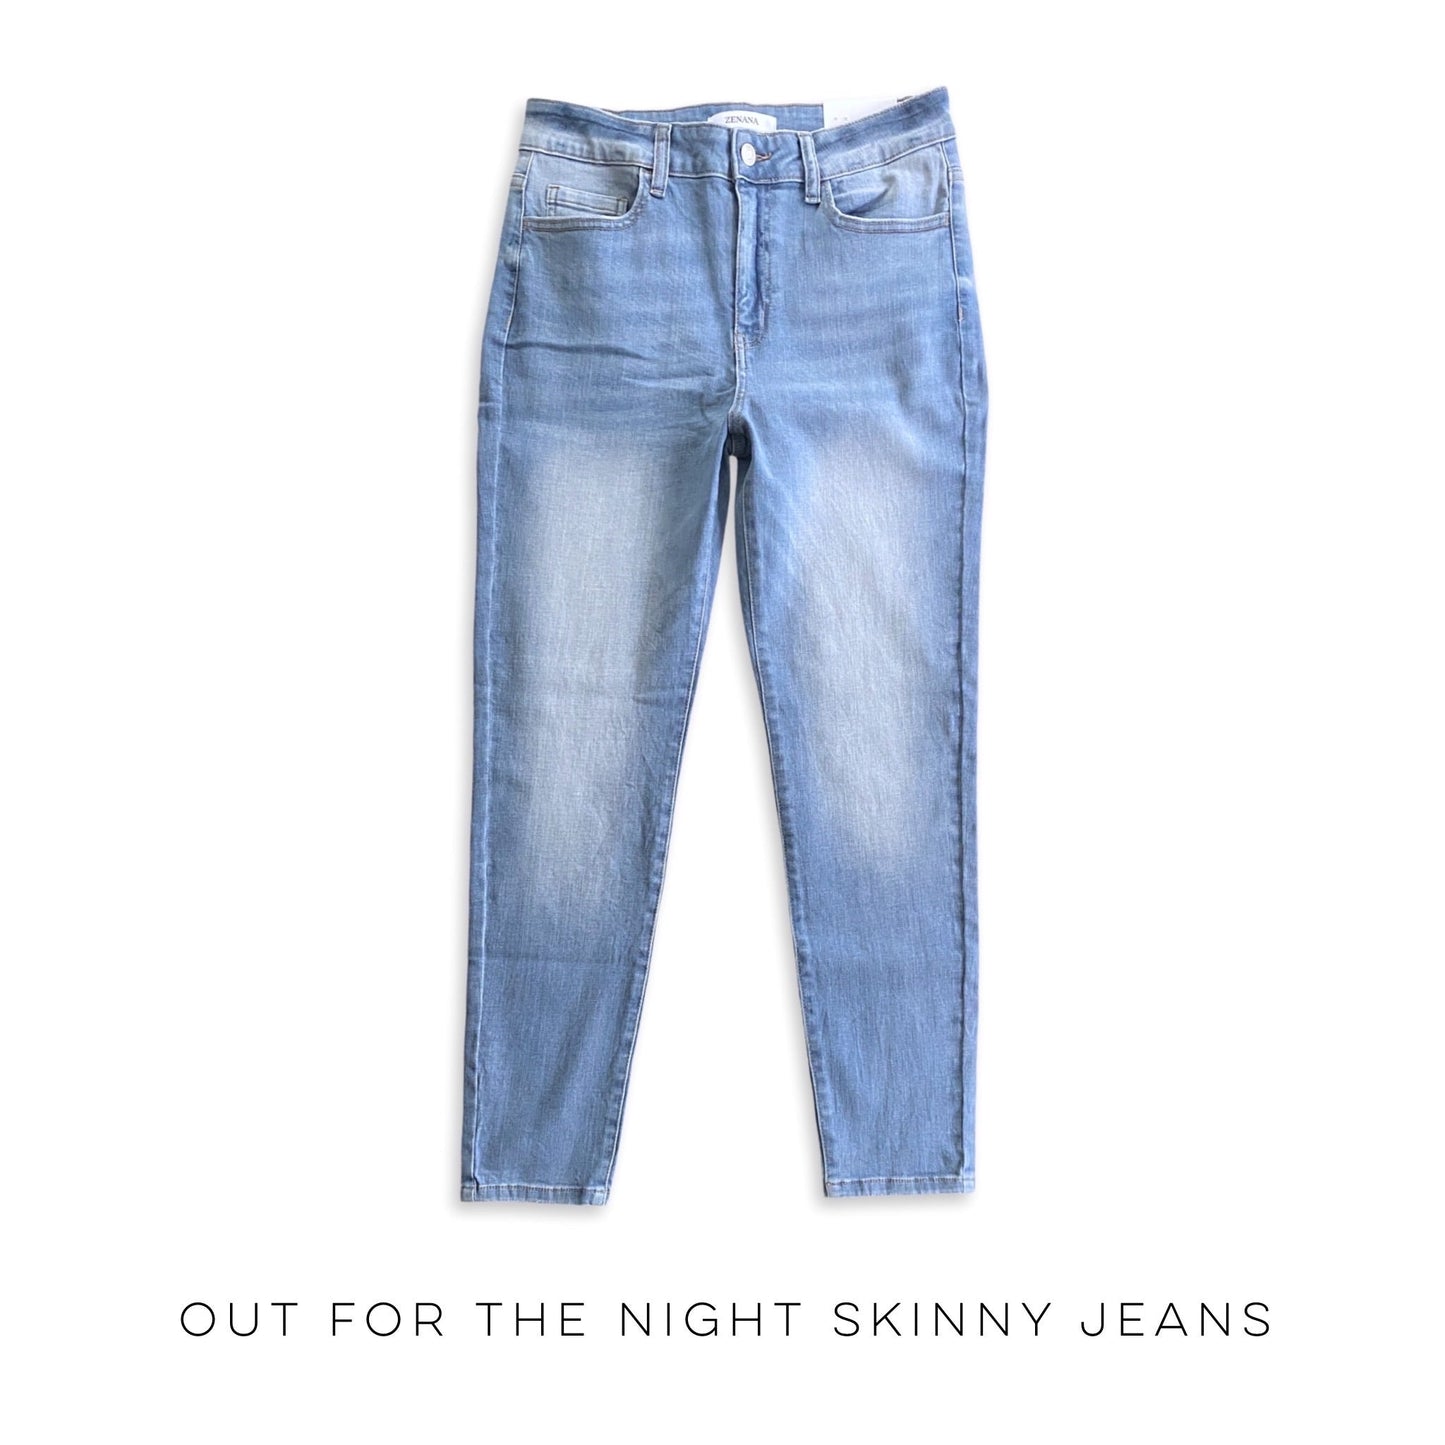 Out for the Night Skinny Jeans